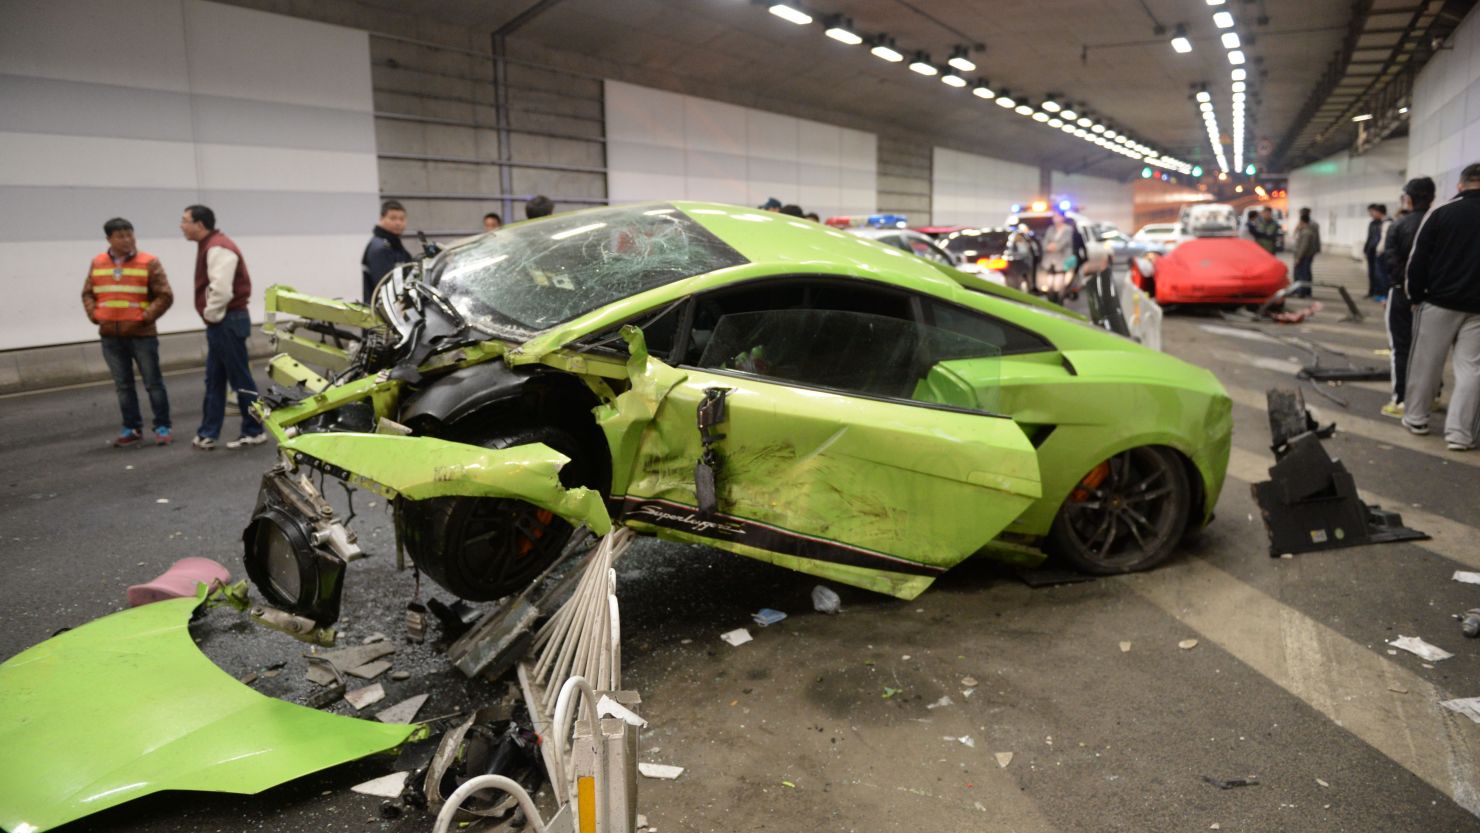 A wrecked Lamborghini lies in the center of a Beijing tunnel after a crash involving a Ferrari in a high-speed road race on April 11.